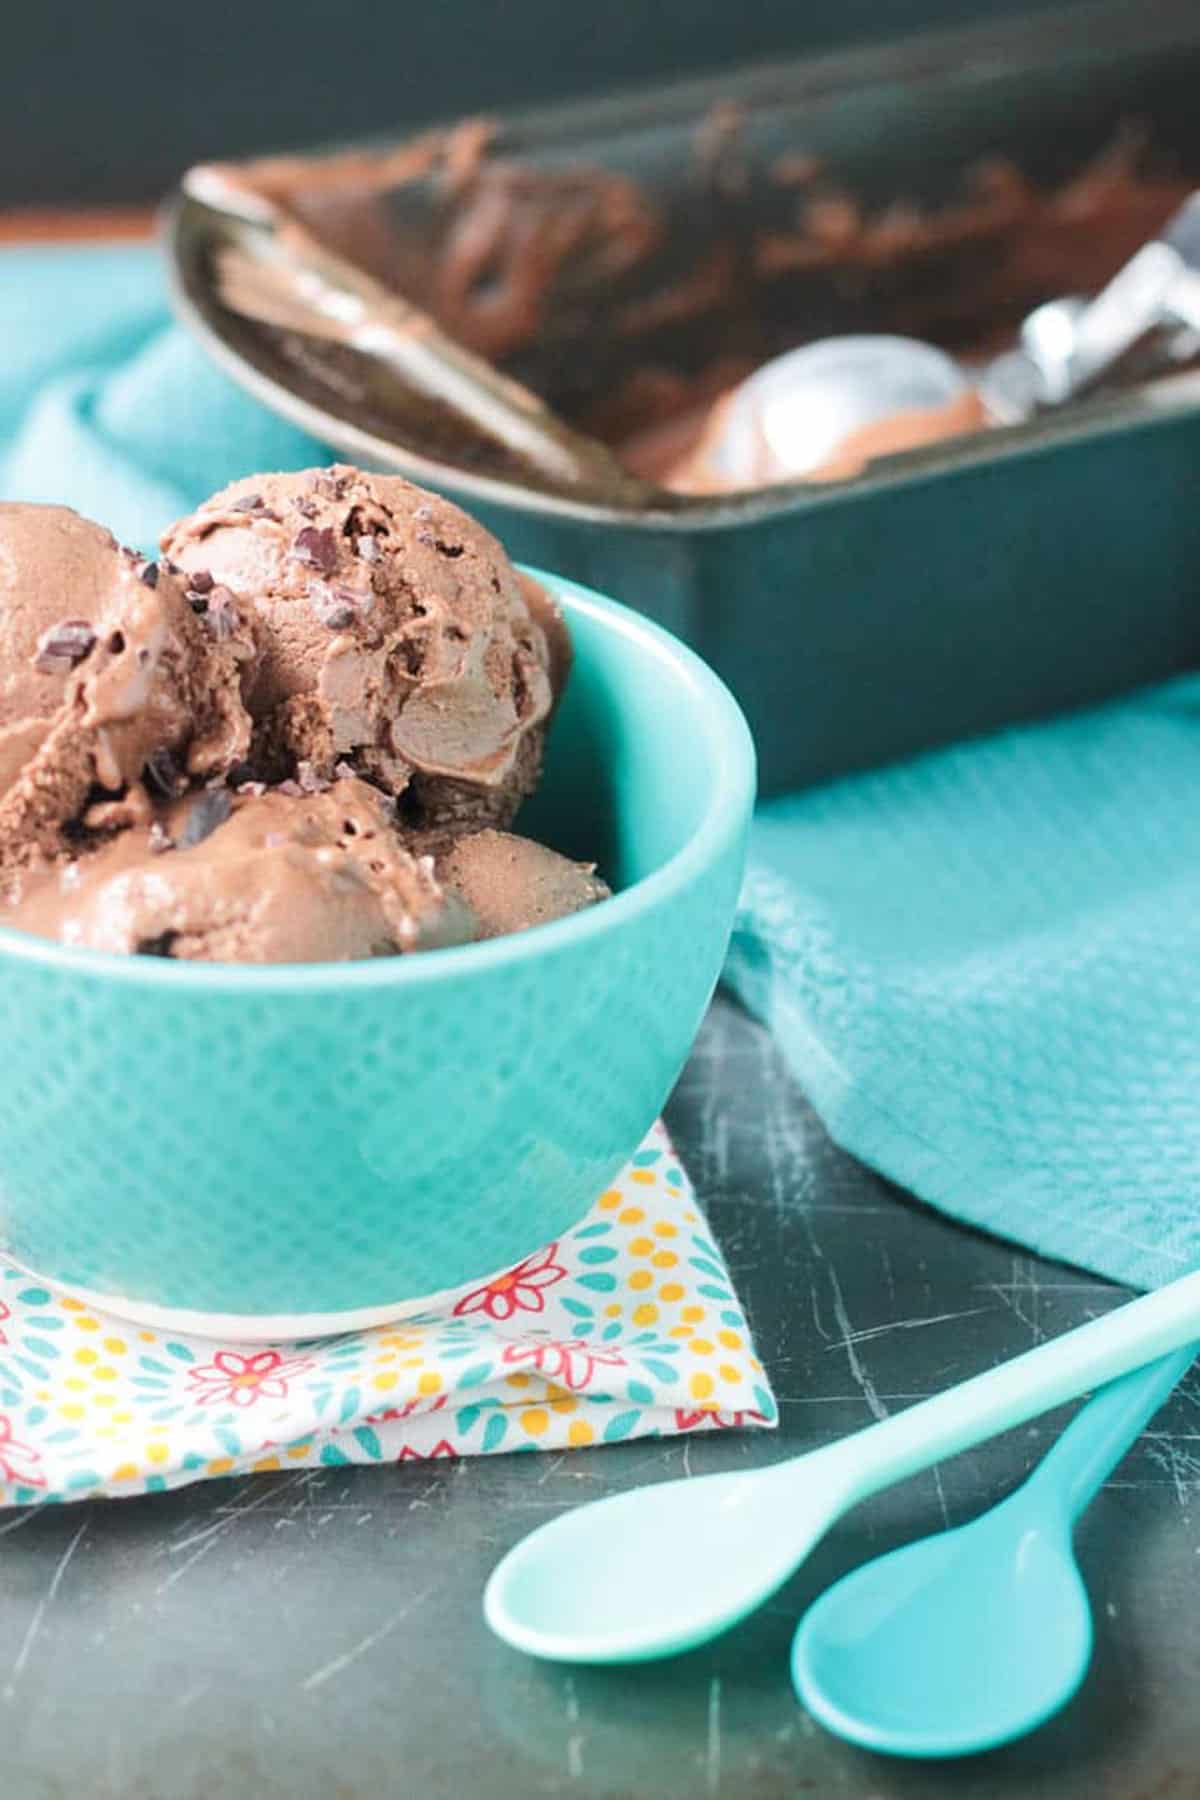 two blue spoons lying next to a bowl with a container in the background